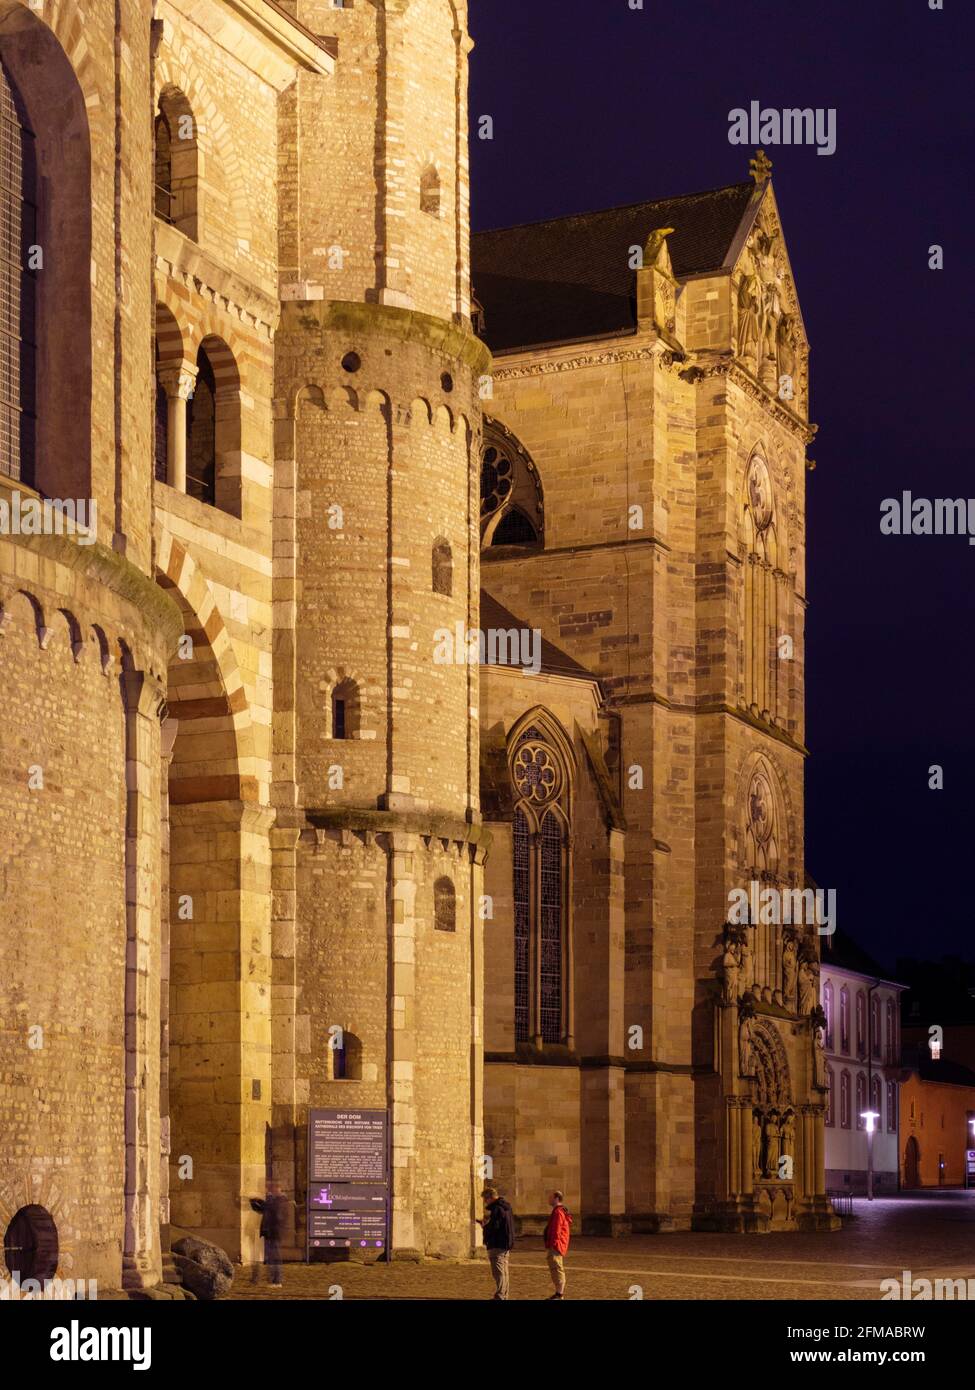 Cathedral and Church of Our Lady, night, Trier, UNESCO World Heritage, Rhineland-Palatinate, Germany Stock Photo